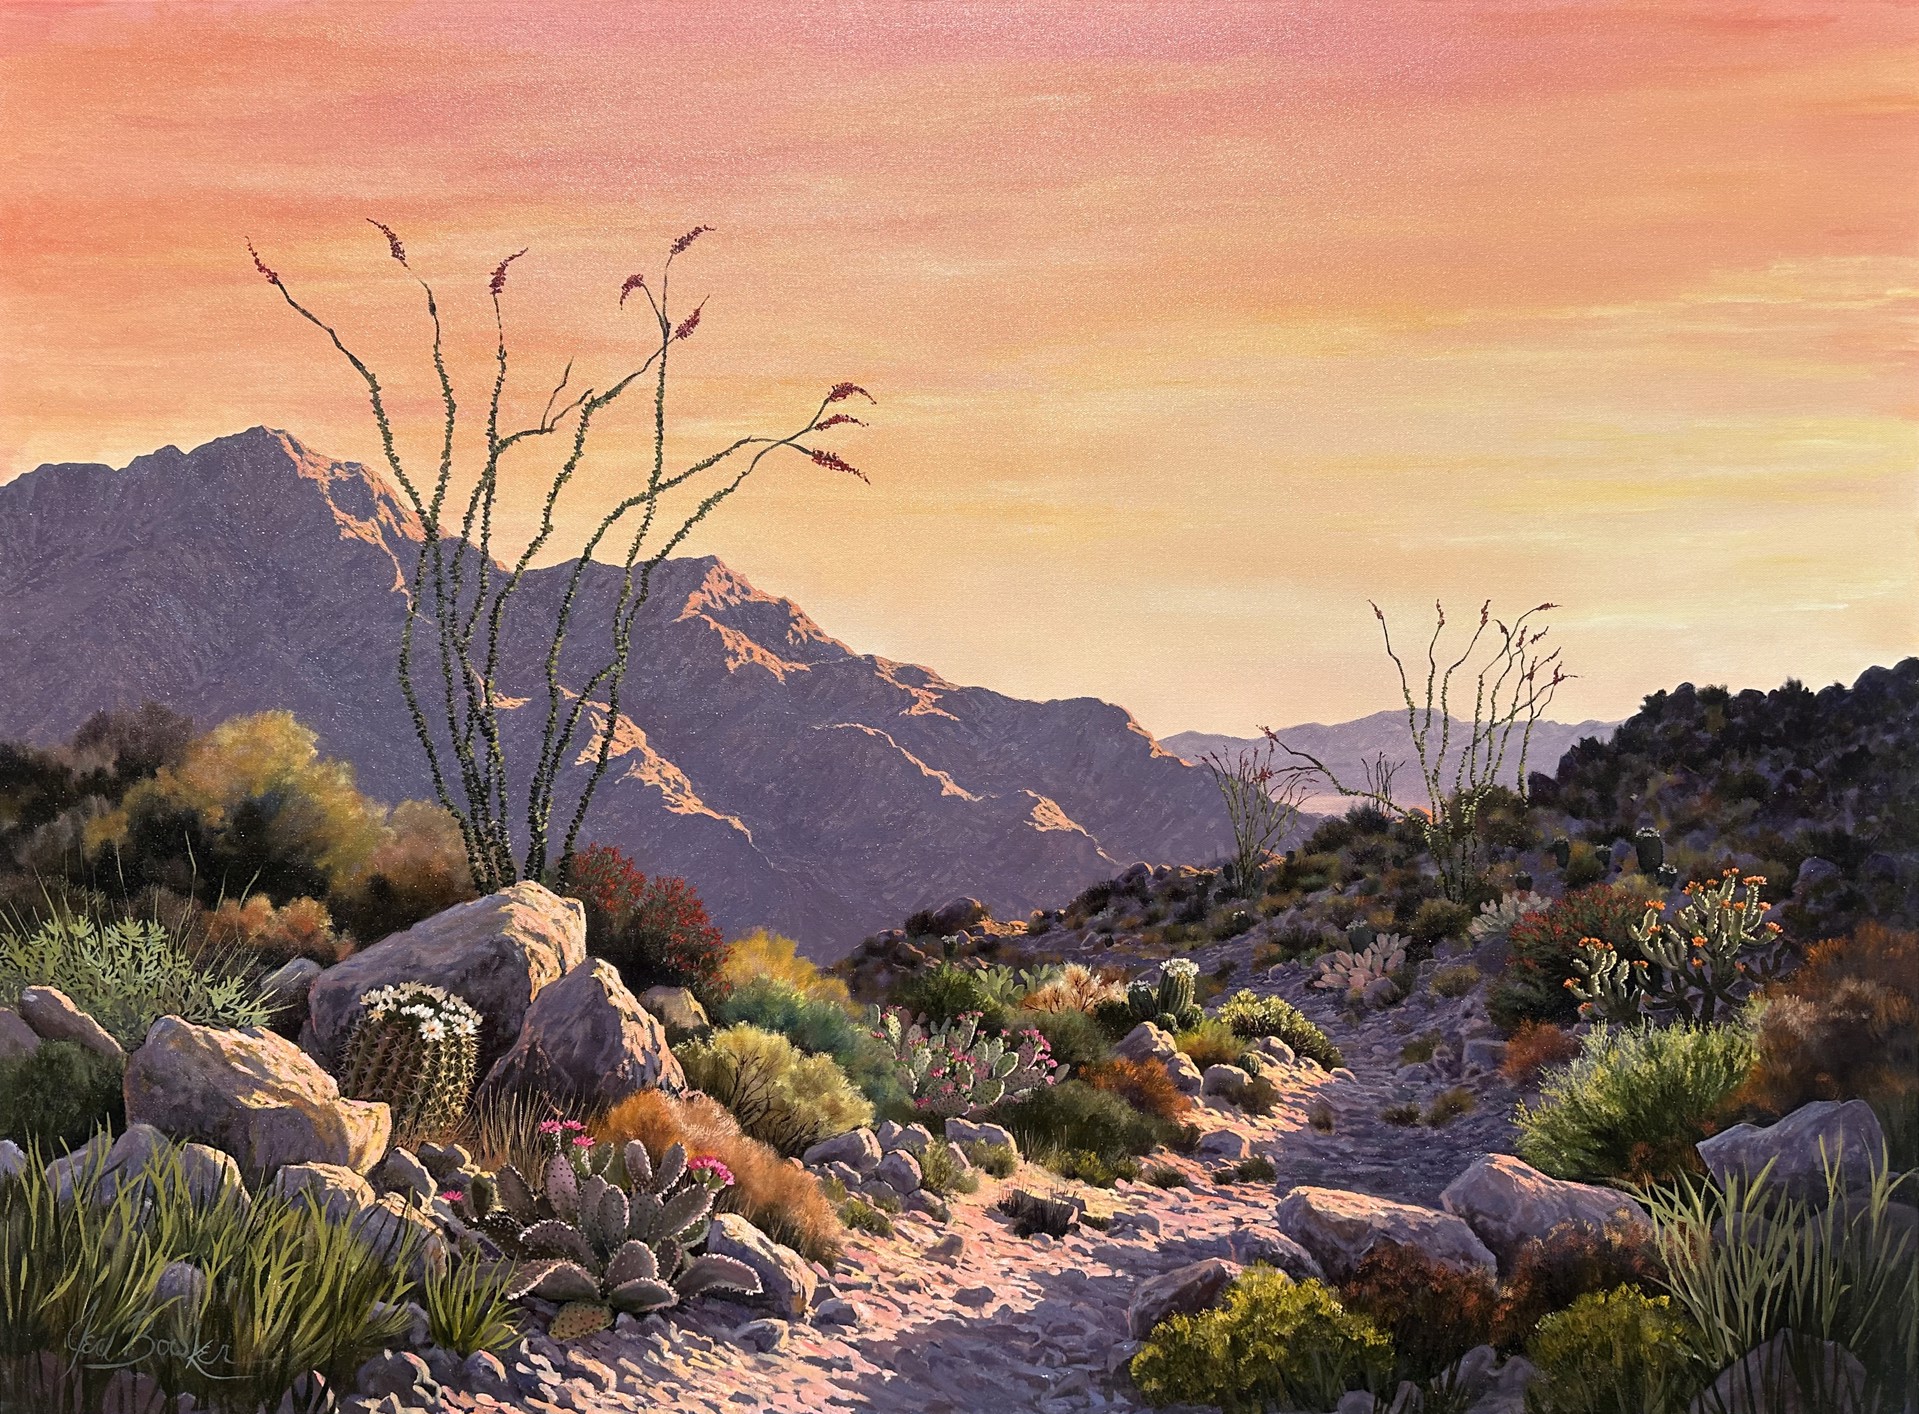 Cactus Blooms in Morning Glow by Jed Bowker